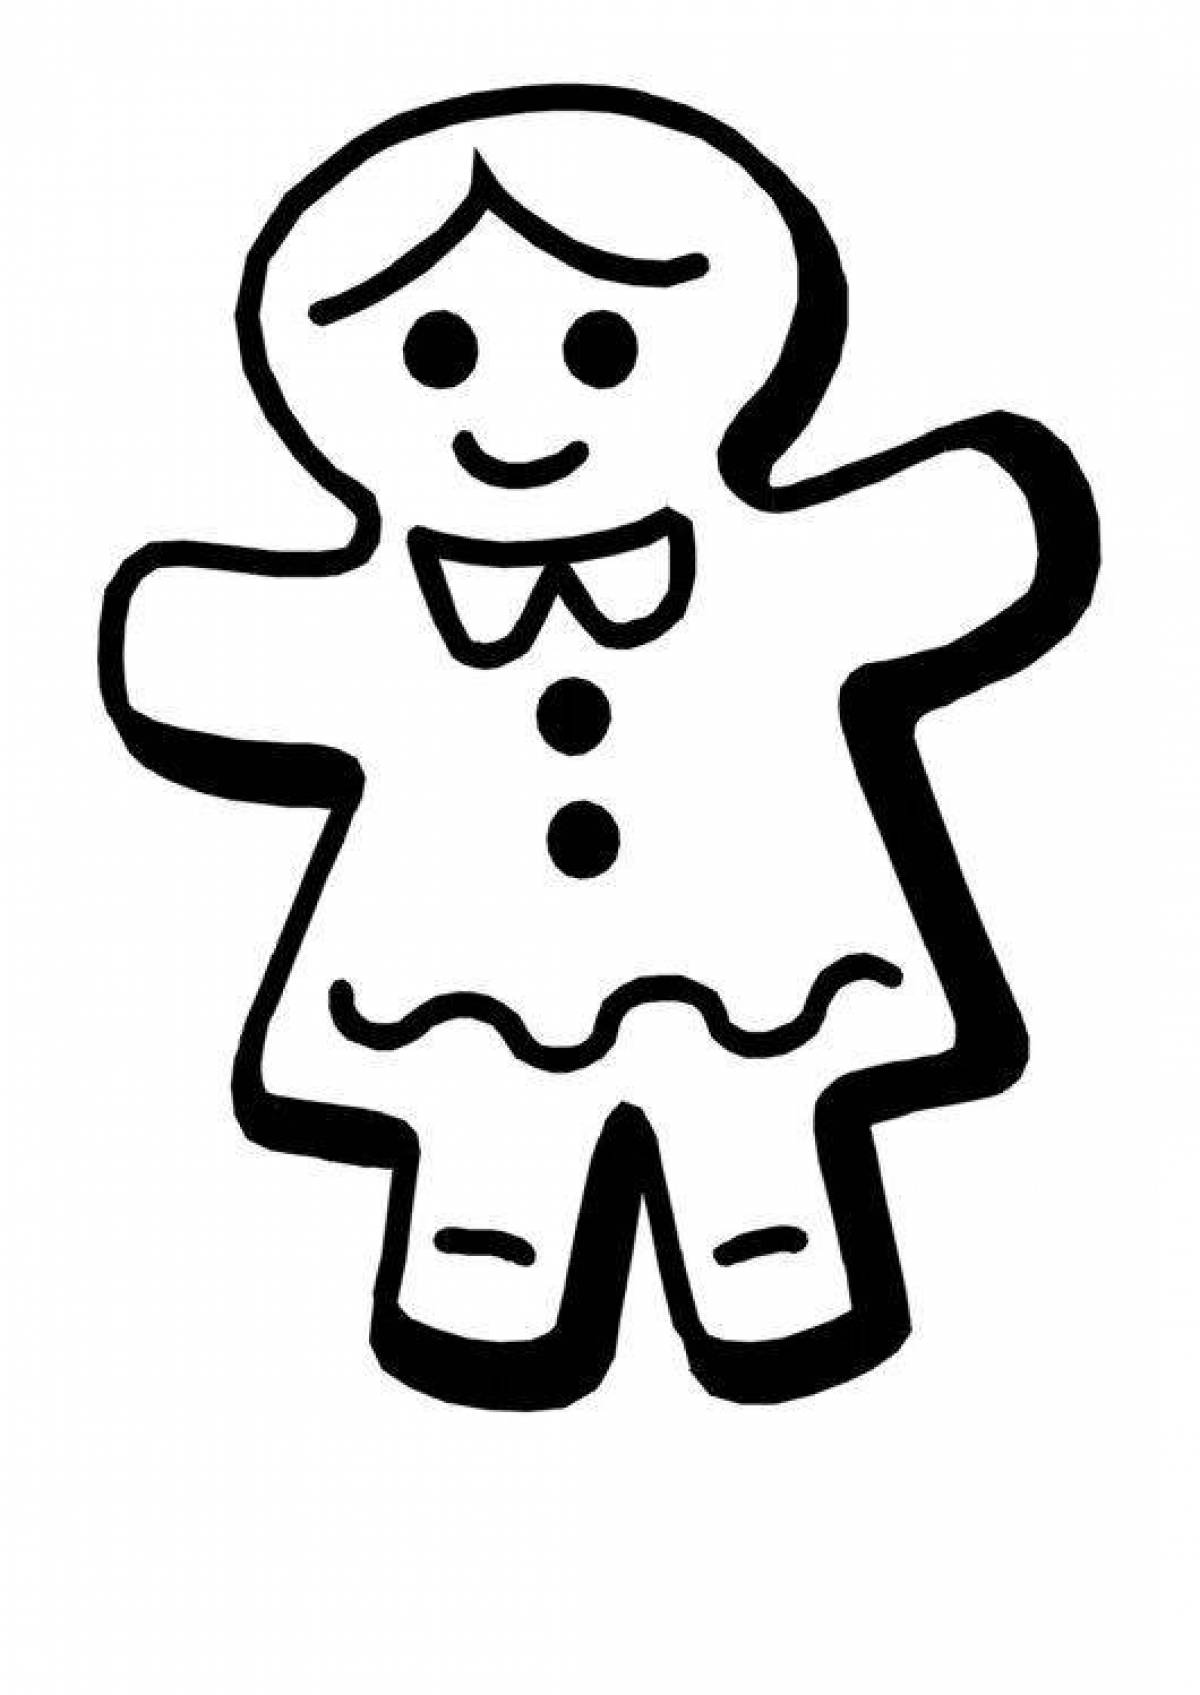 Colouring awesome gingerbread man